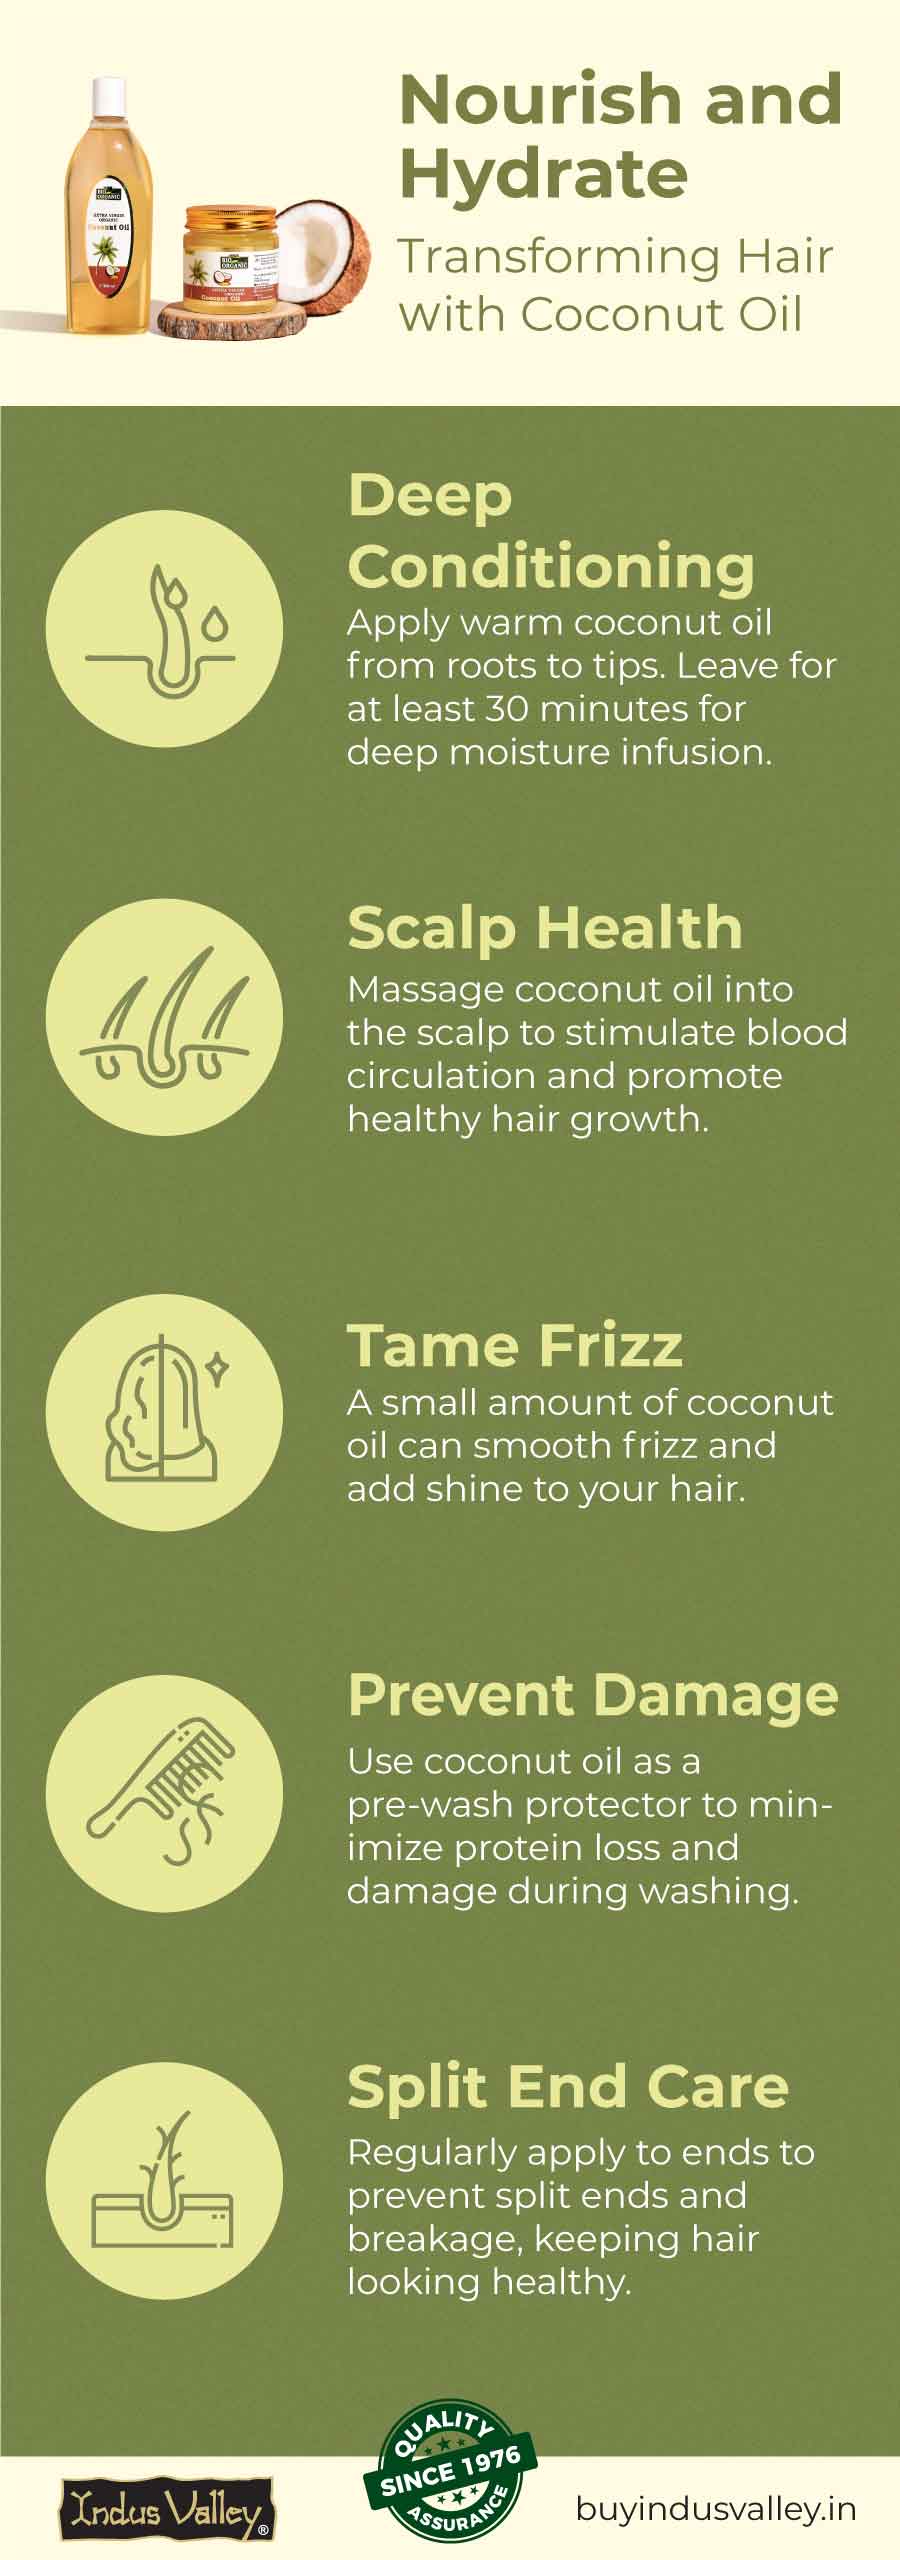 Nourish and Hydrate: Transforming Hair with Coconut Oil